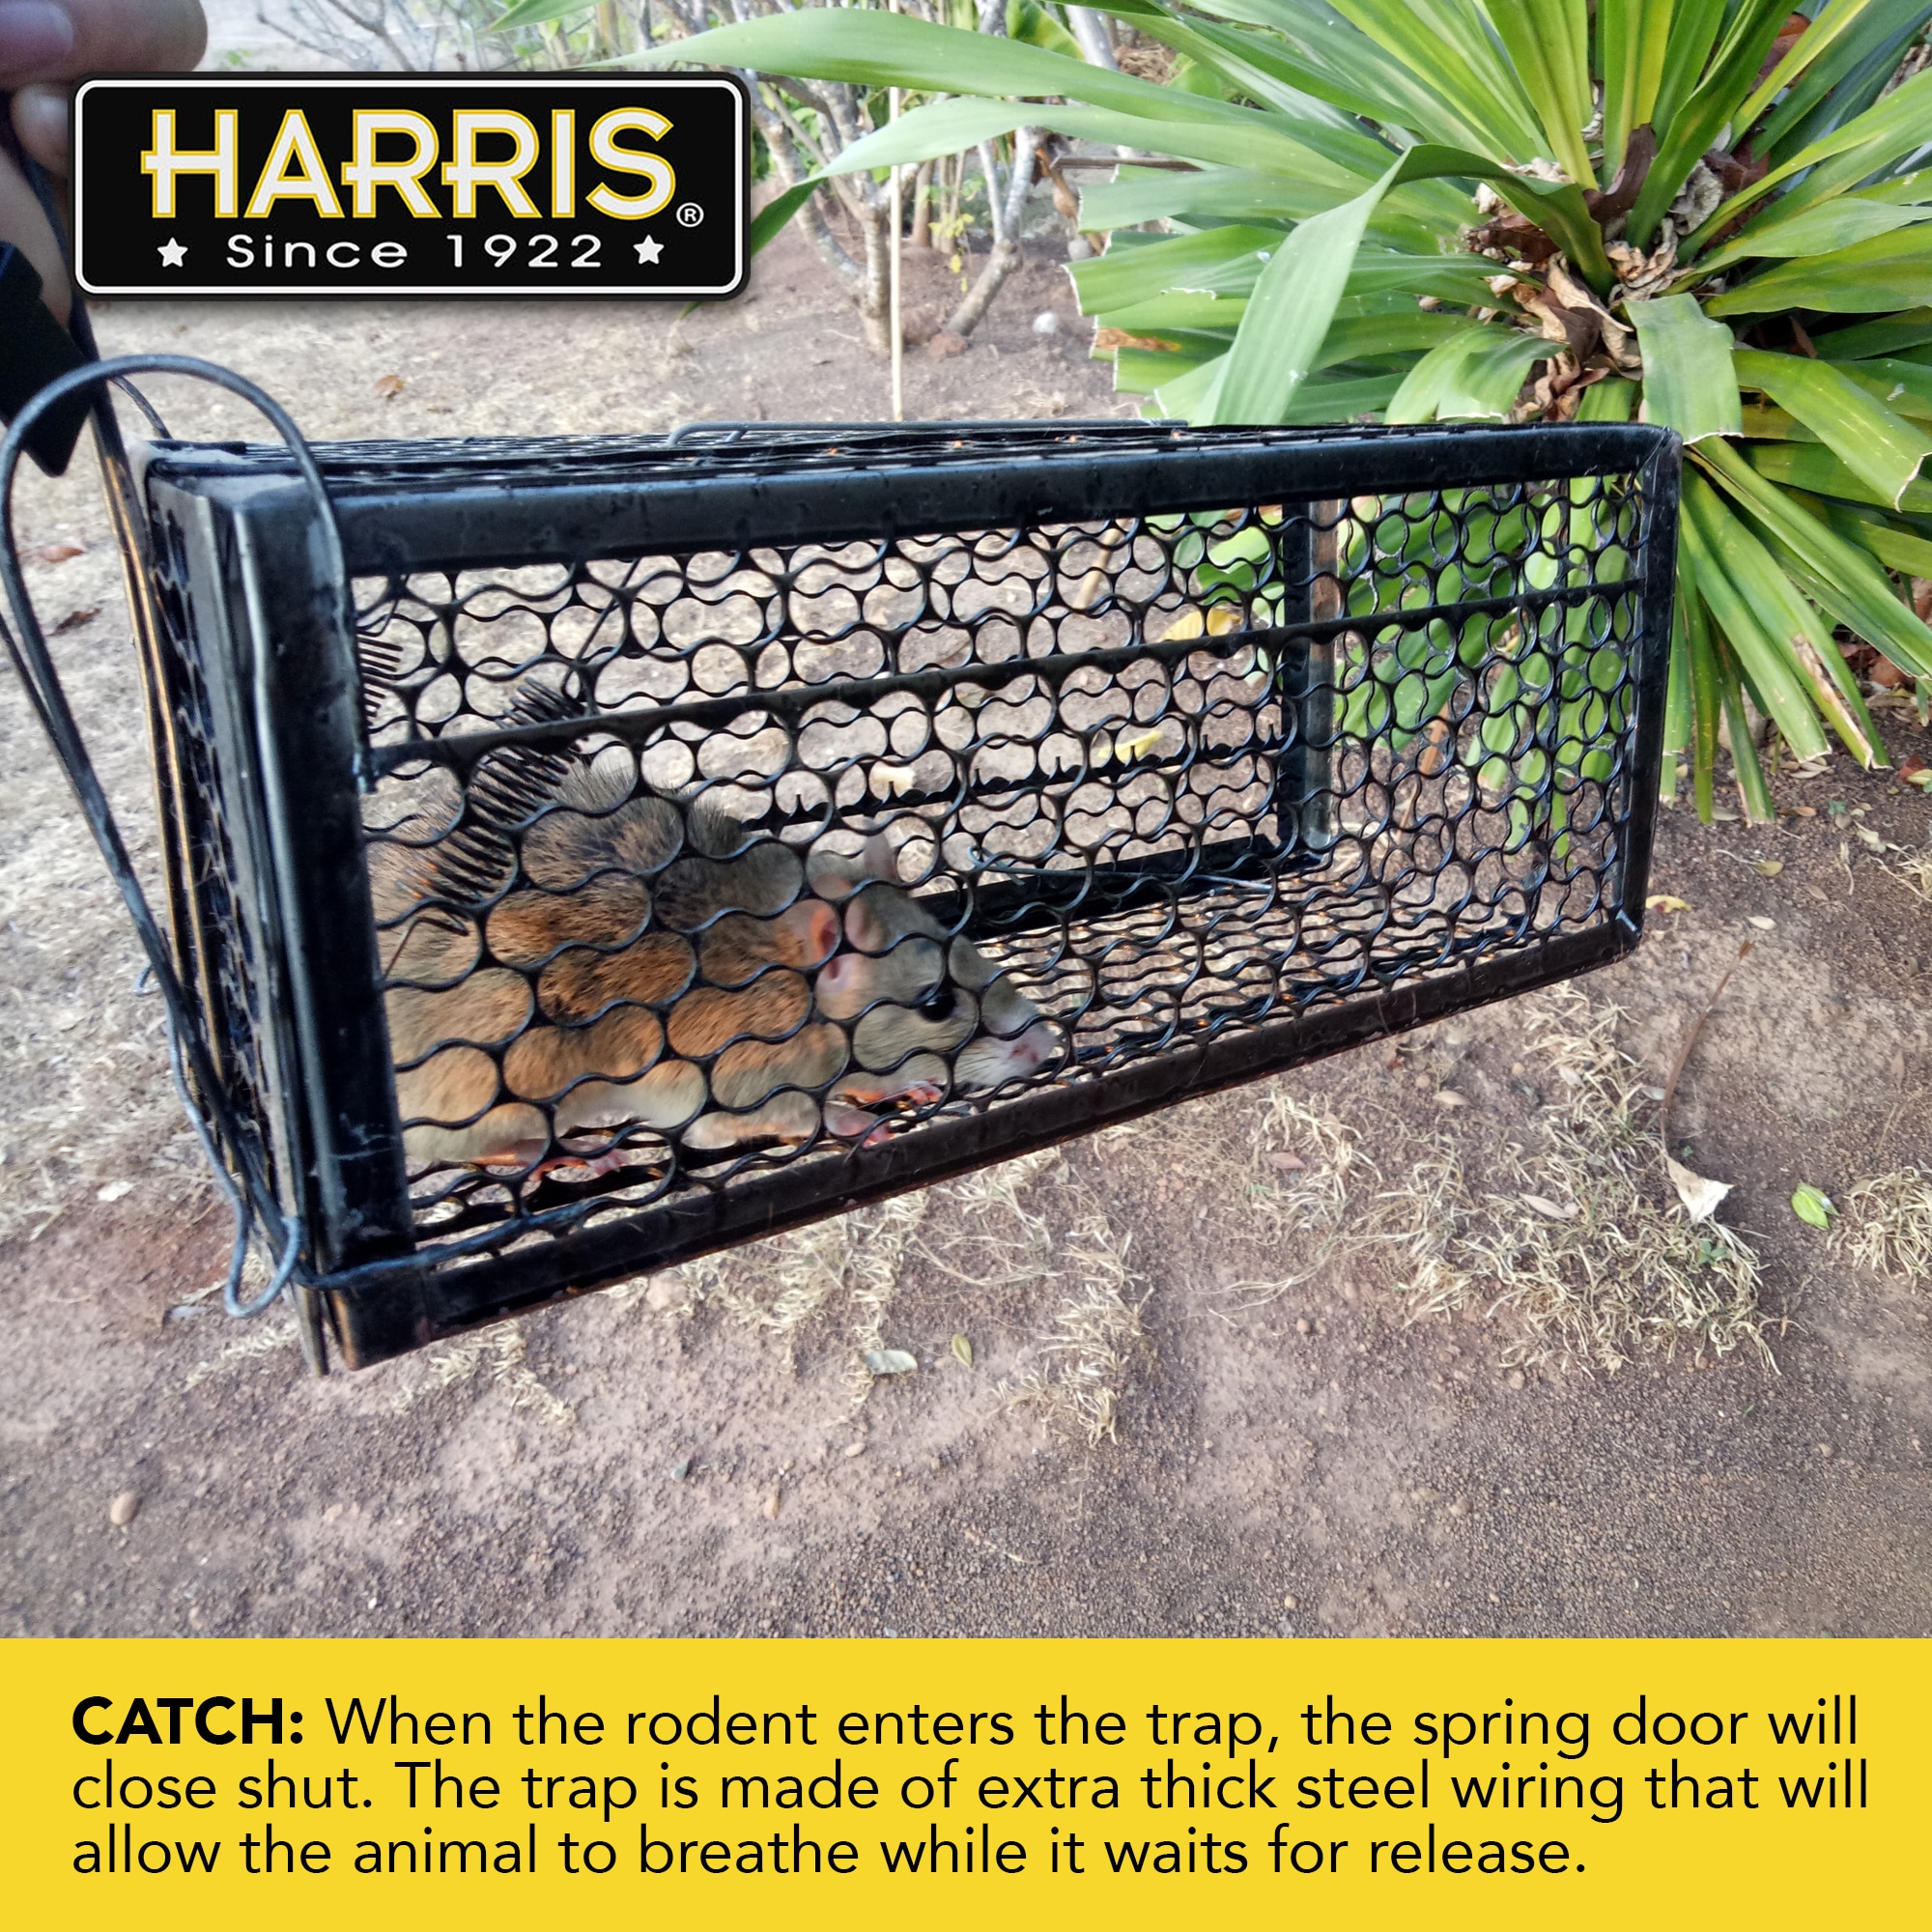 Harris Catch and Release Humane Mouse Trap